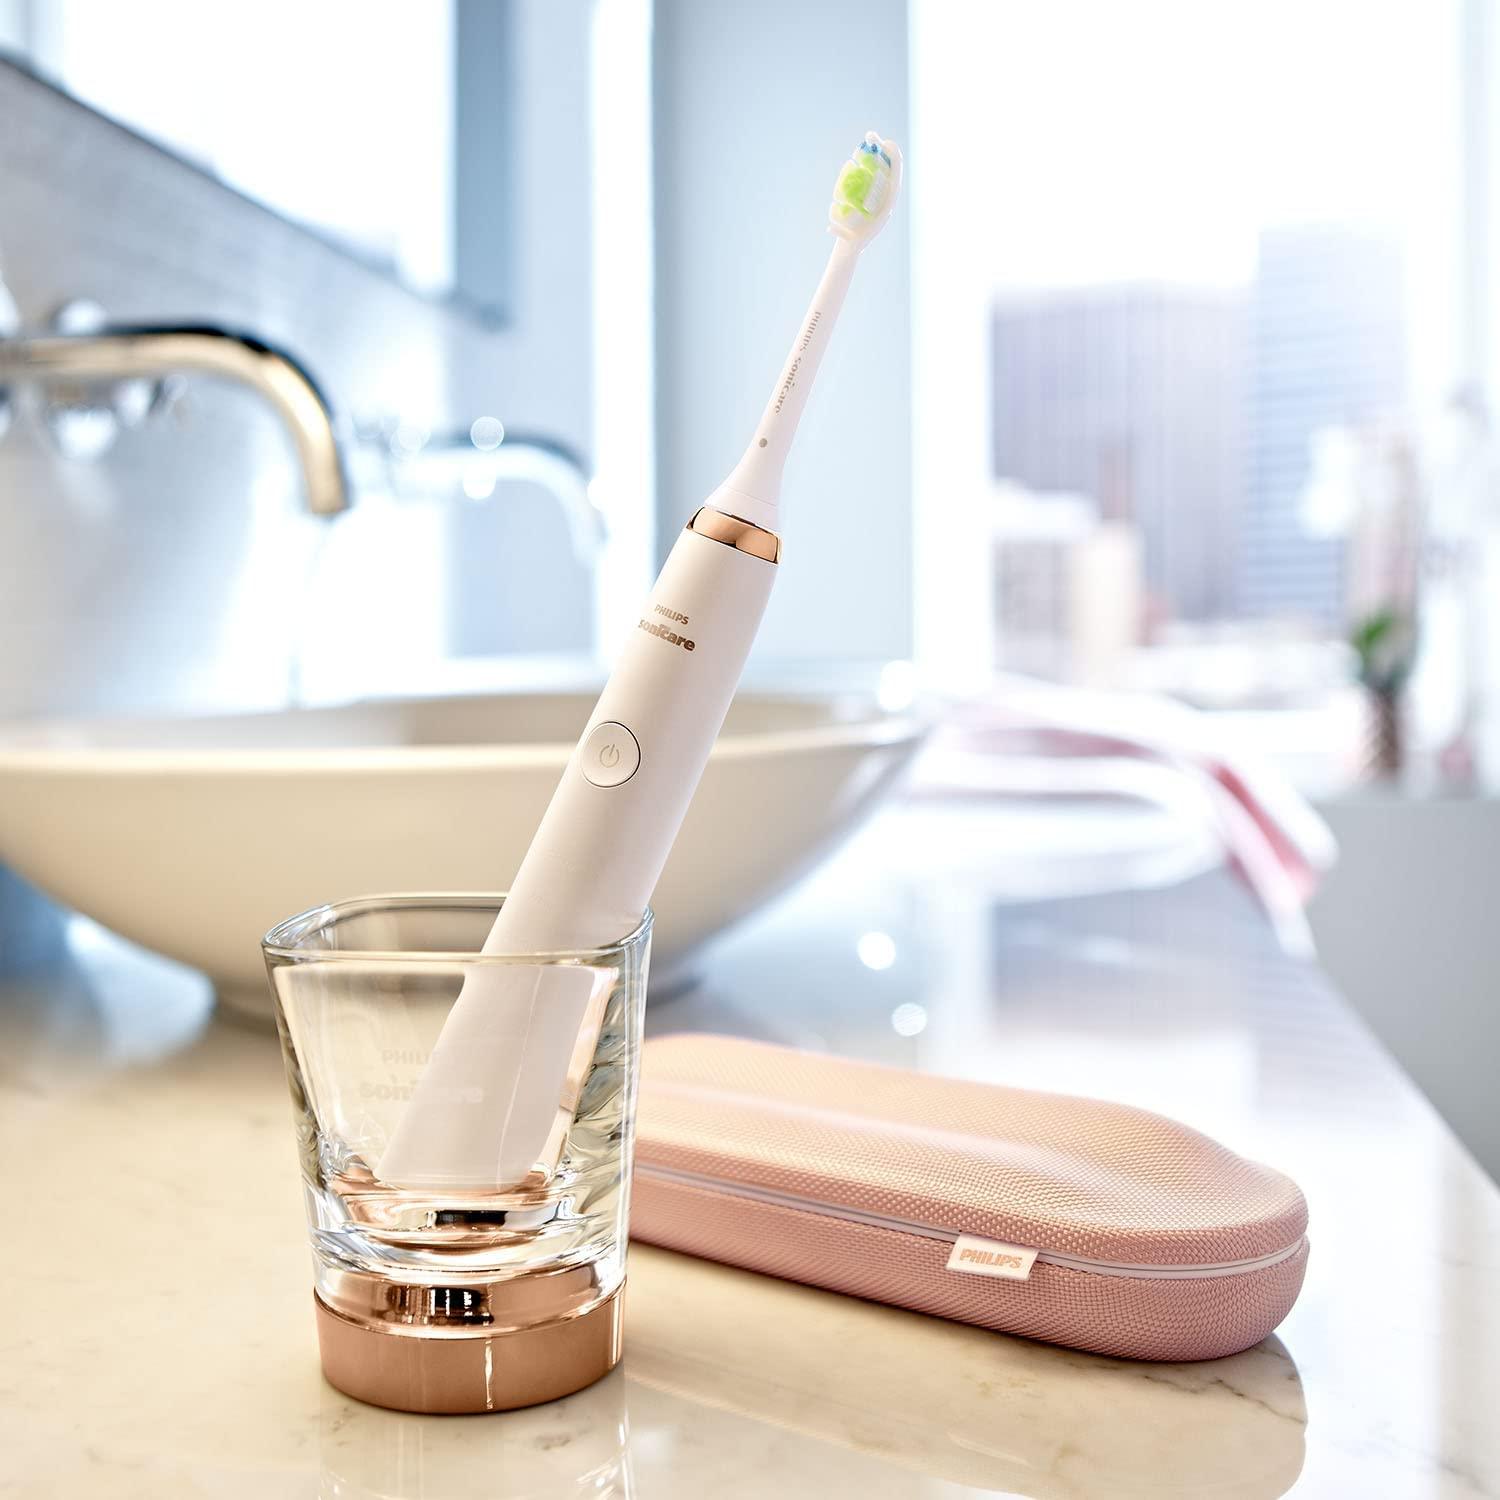 Philips Sonicare Diamond Clean Sonic Electric Toothbrush, HX9312/04, Rose Gold - Wellness Shoppee